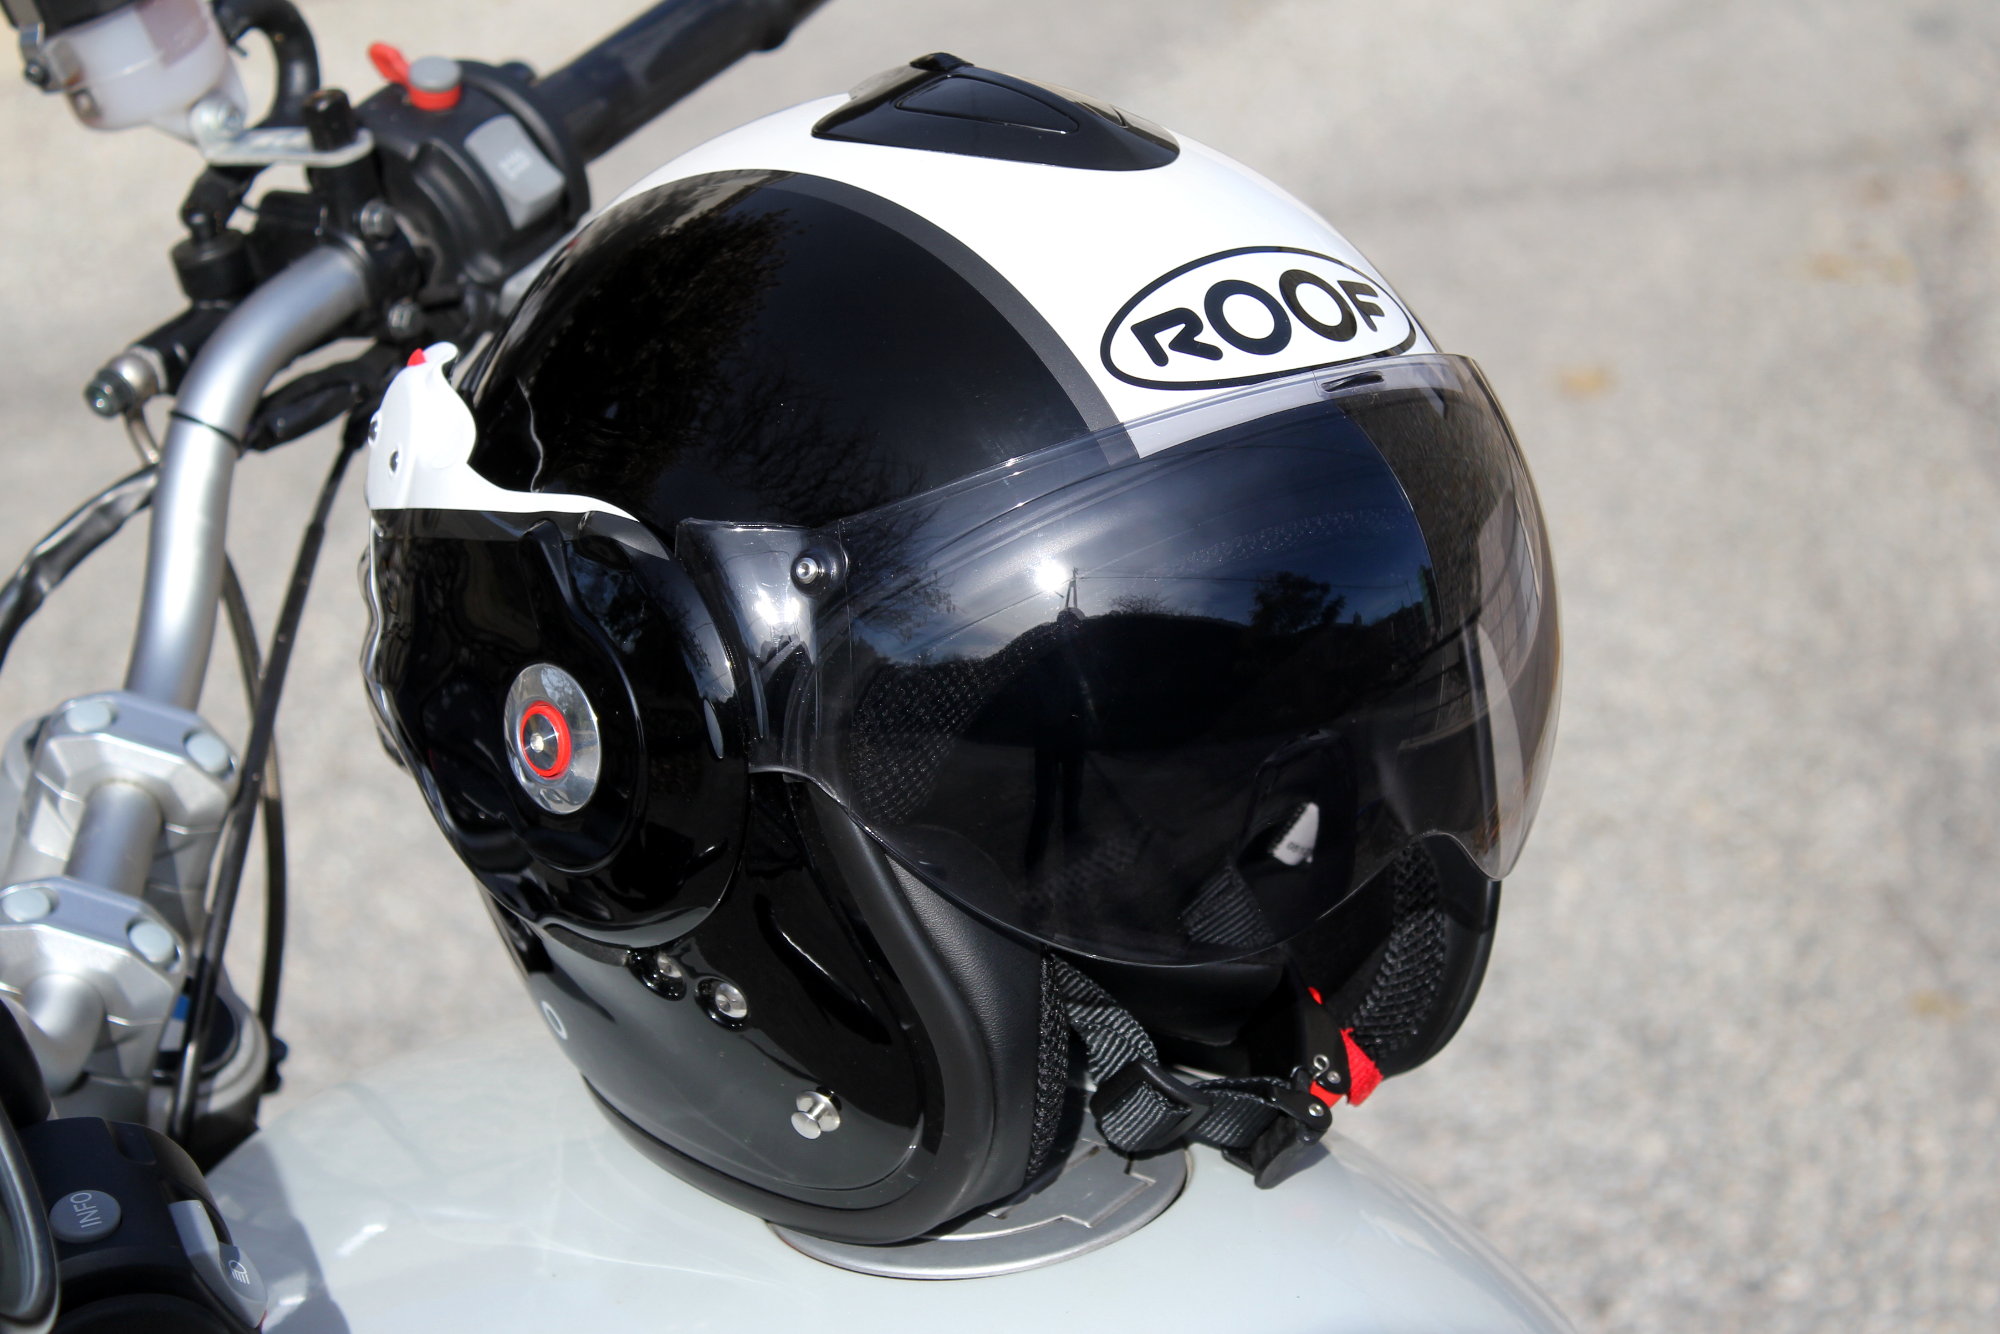 Roof Desmo ouvert